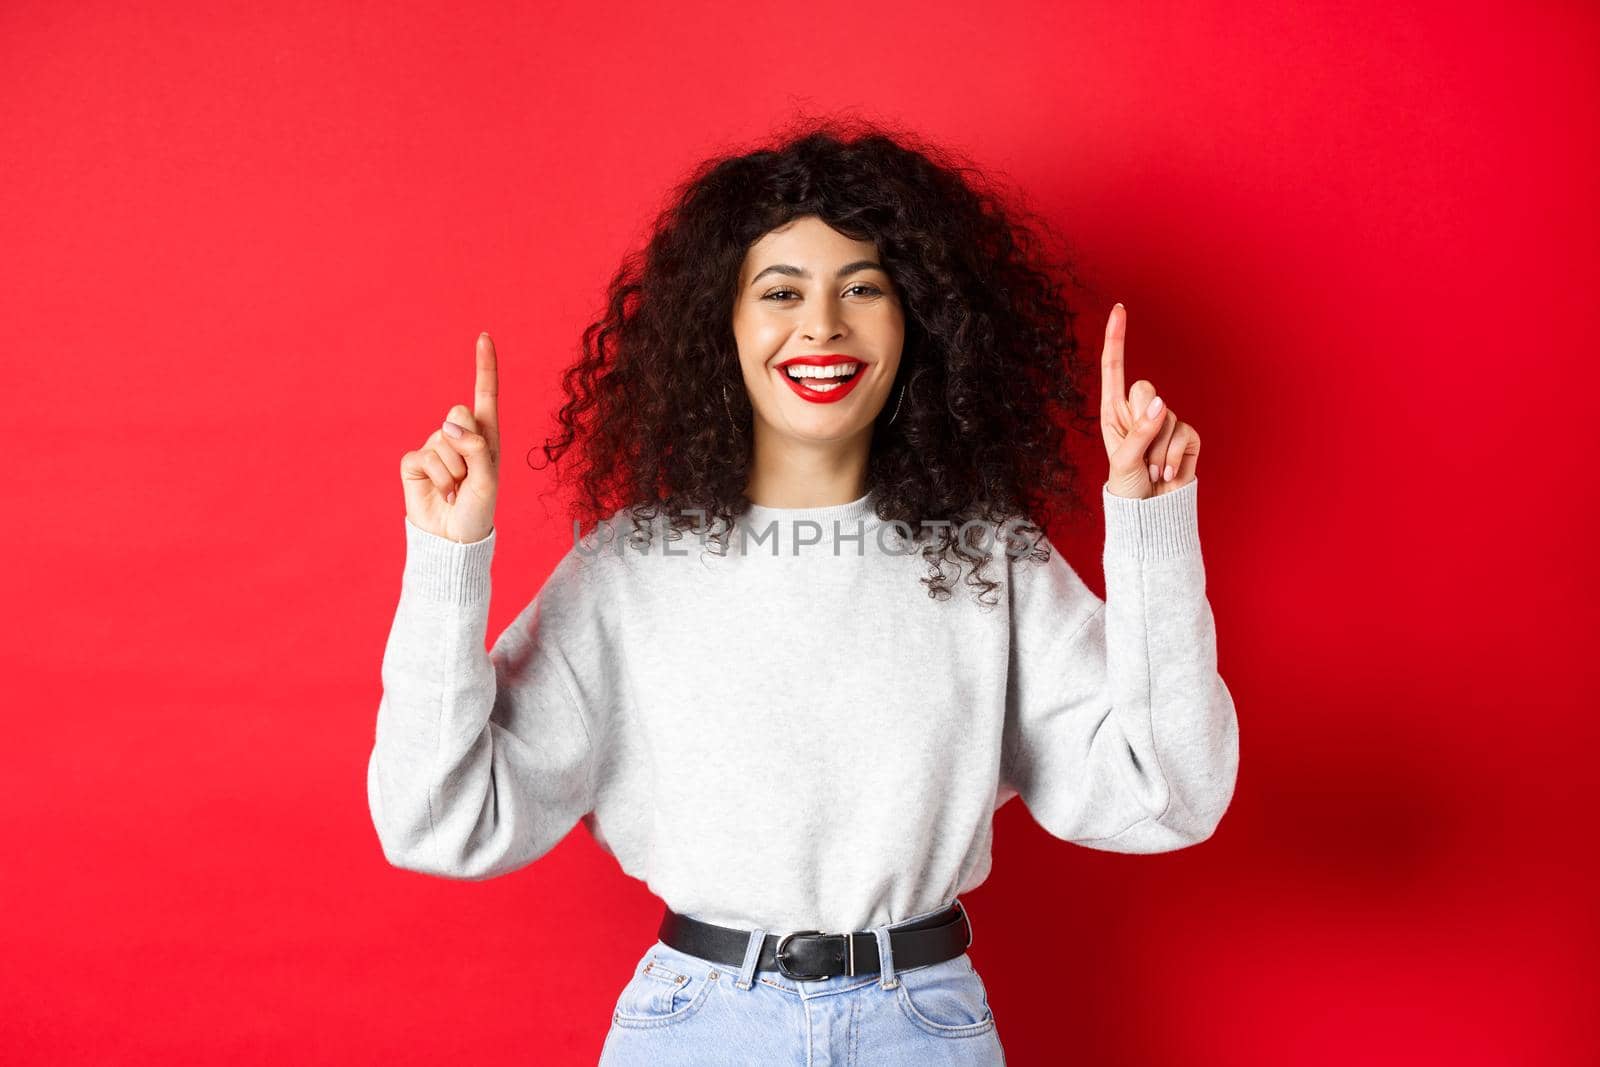 Happy young woman with curly hair, pointing fingers up and laughing, showing perfect white smile, standing against red background.